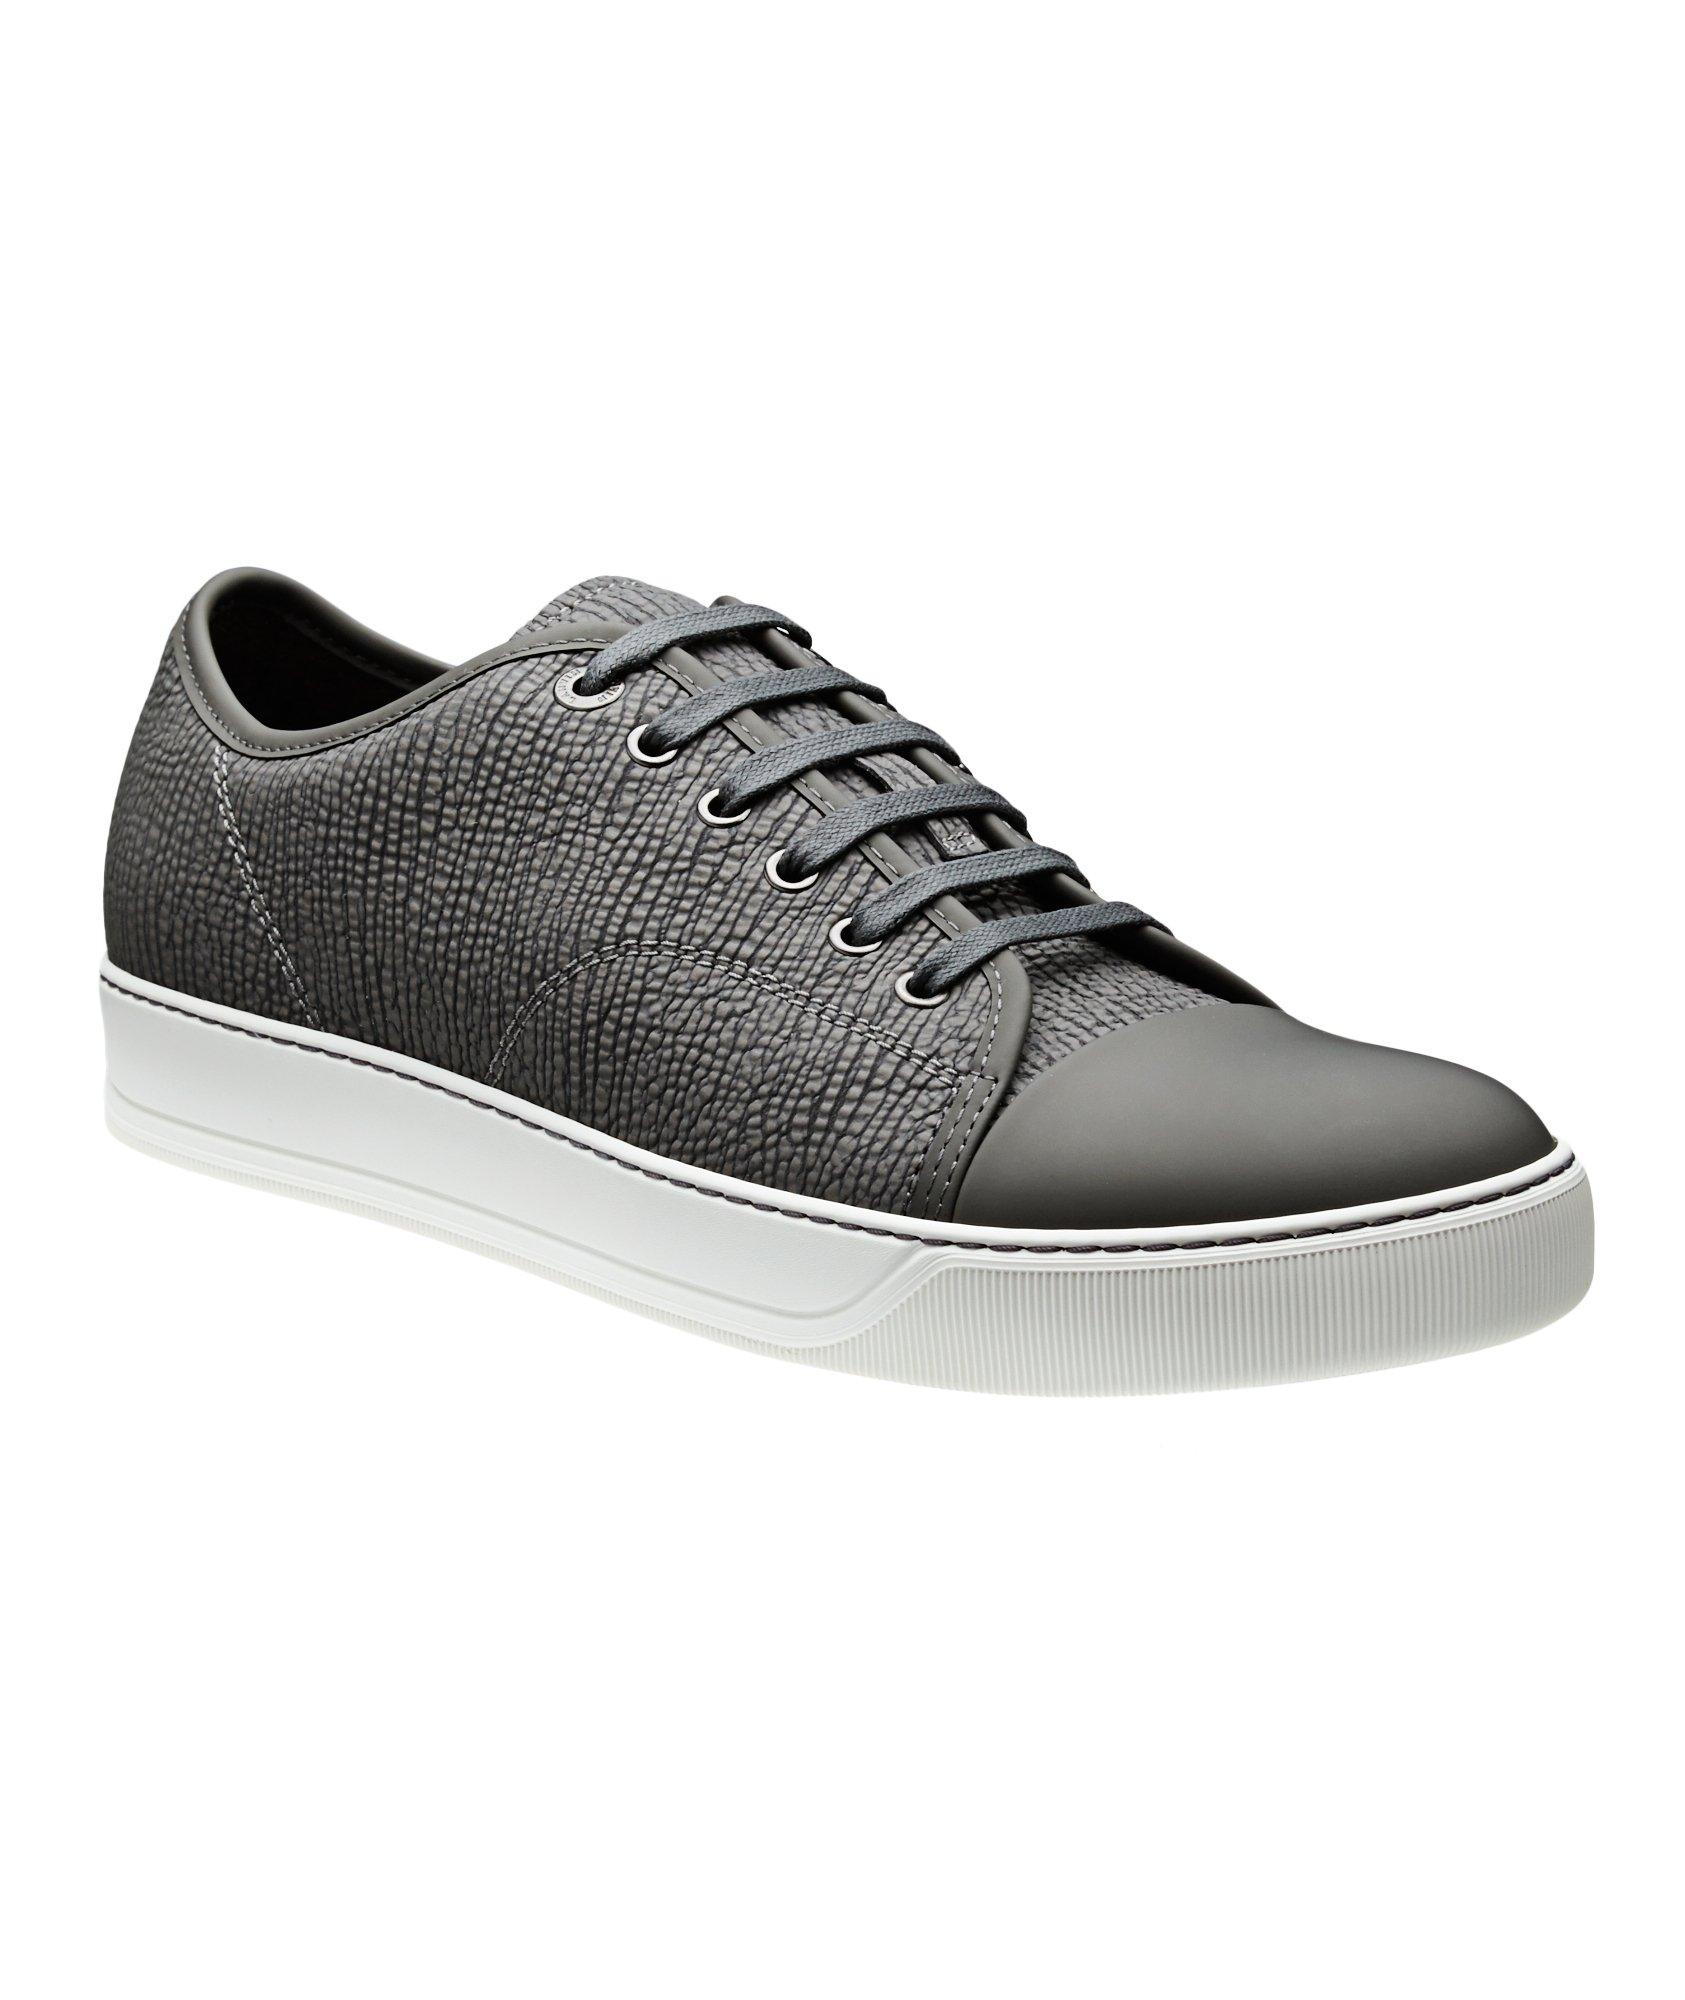 Sharkskin Embossed Leather Low-Tops image 0